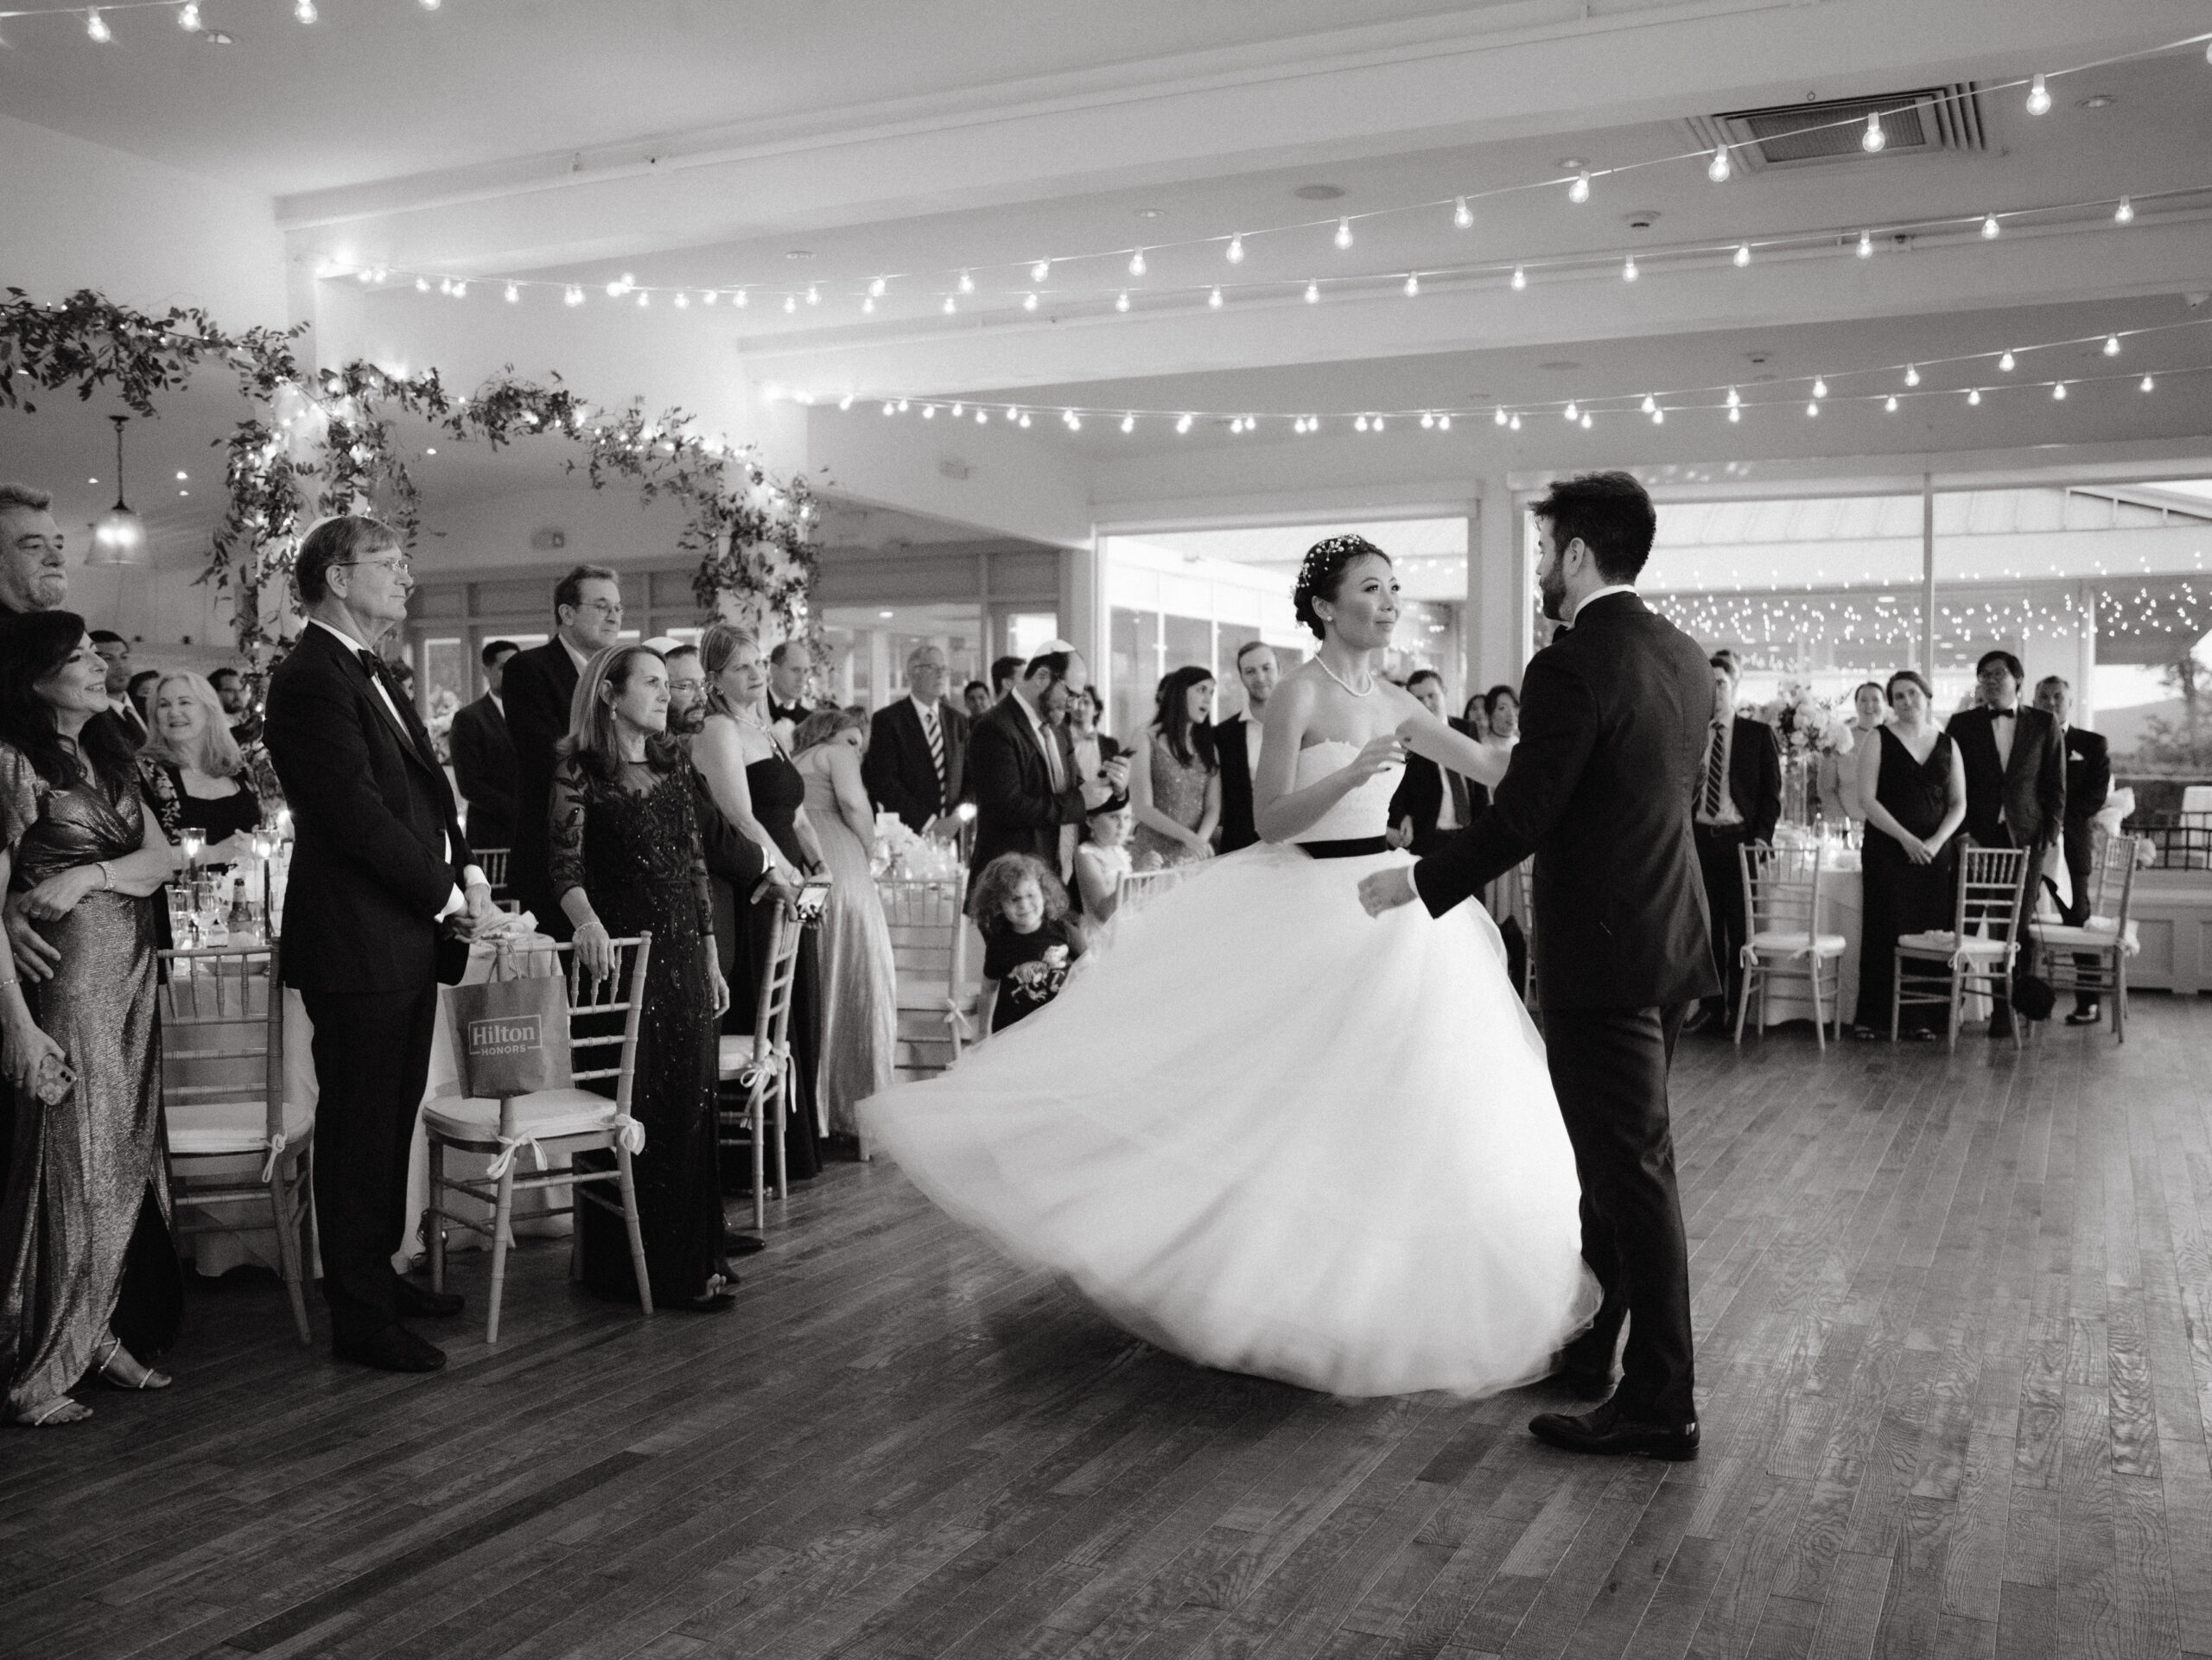 The bride and groom's first dance. Image by Jenny Fu Studio